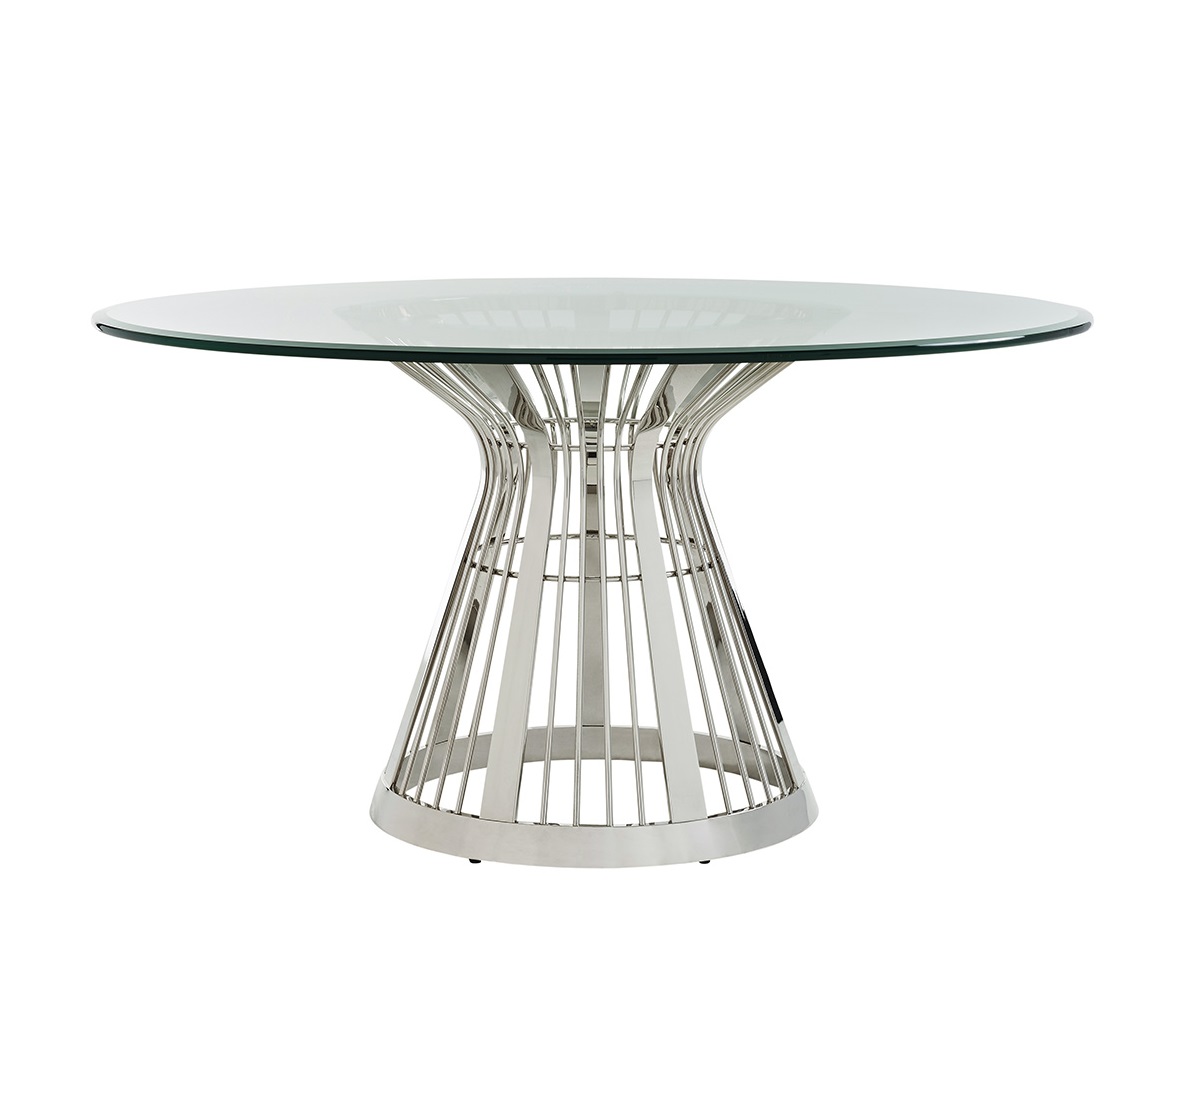 Ariana Riviera Stainless Dining Table, Round Dining Tables For Sale